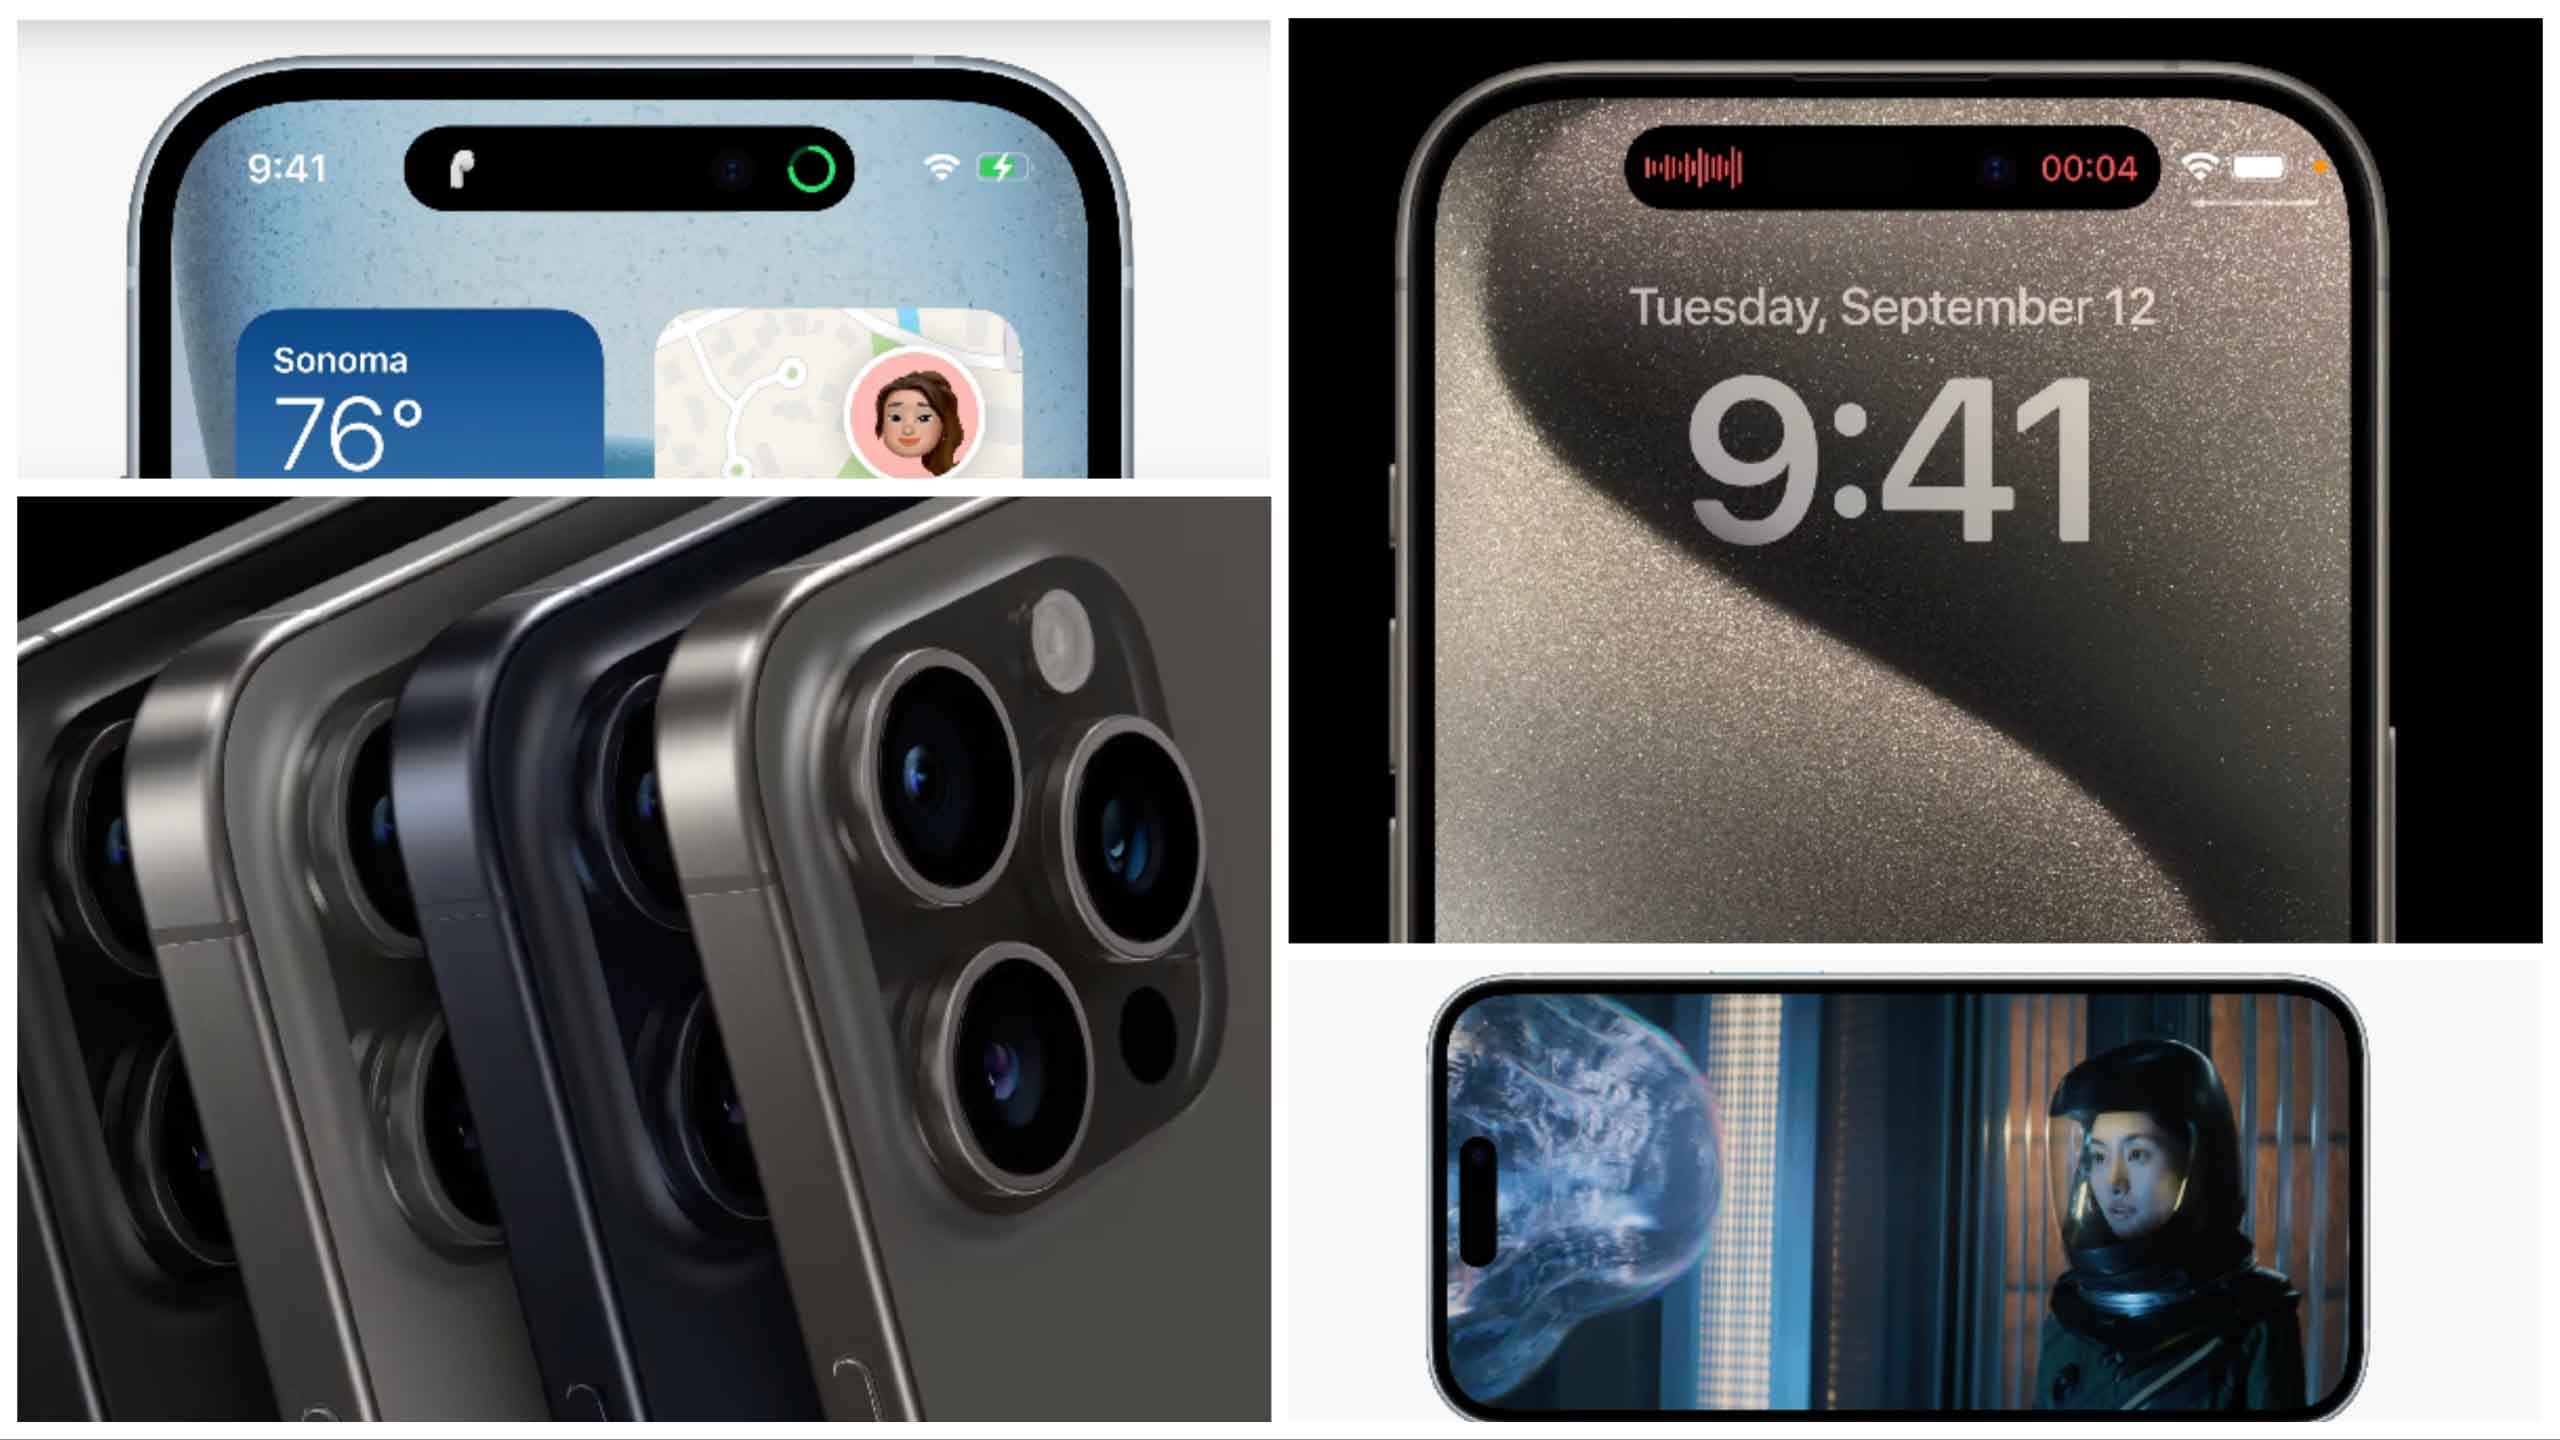 iPhone 15 Pro Max gets 5x optical telephoto lens and other treats